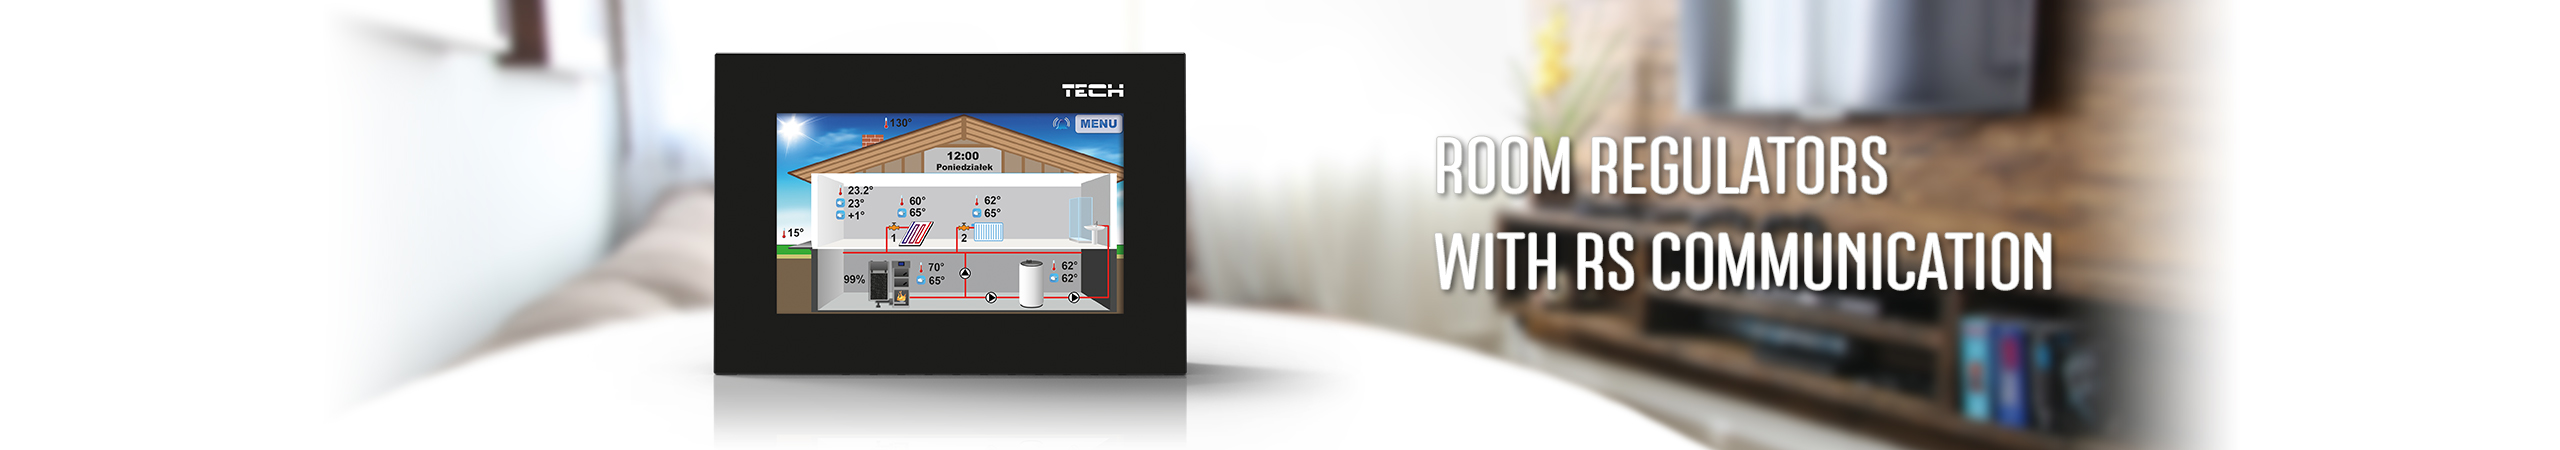 Room regulators with RS communication, wireless heating control - TECH Controllers - TECH Sterowniki